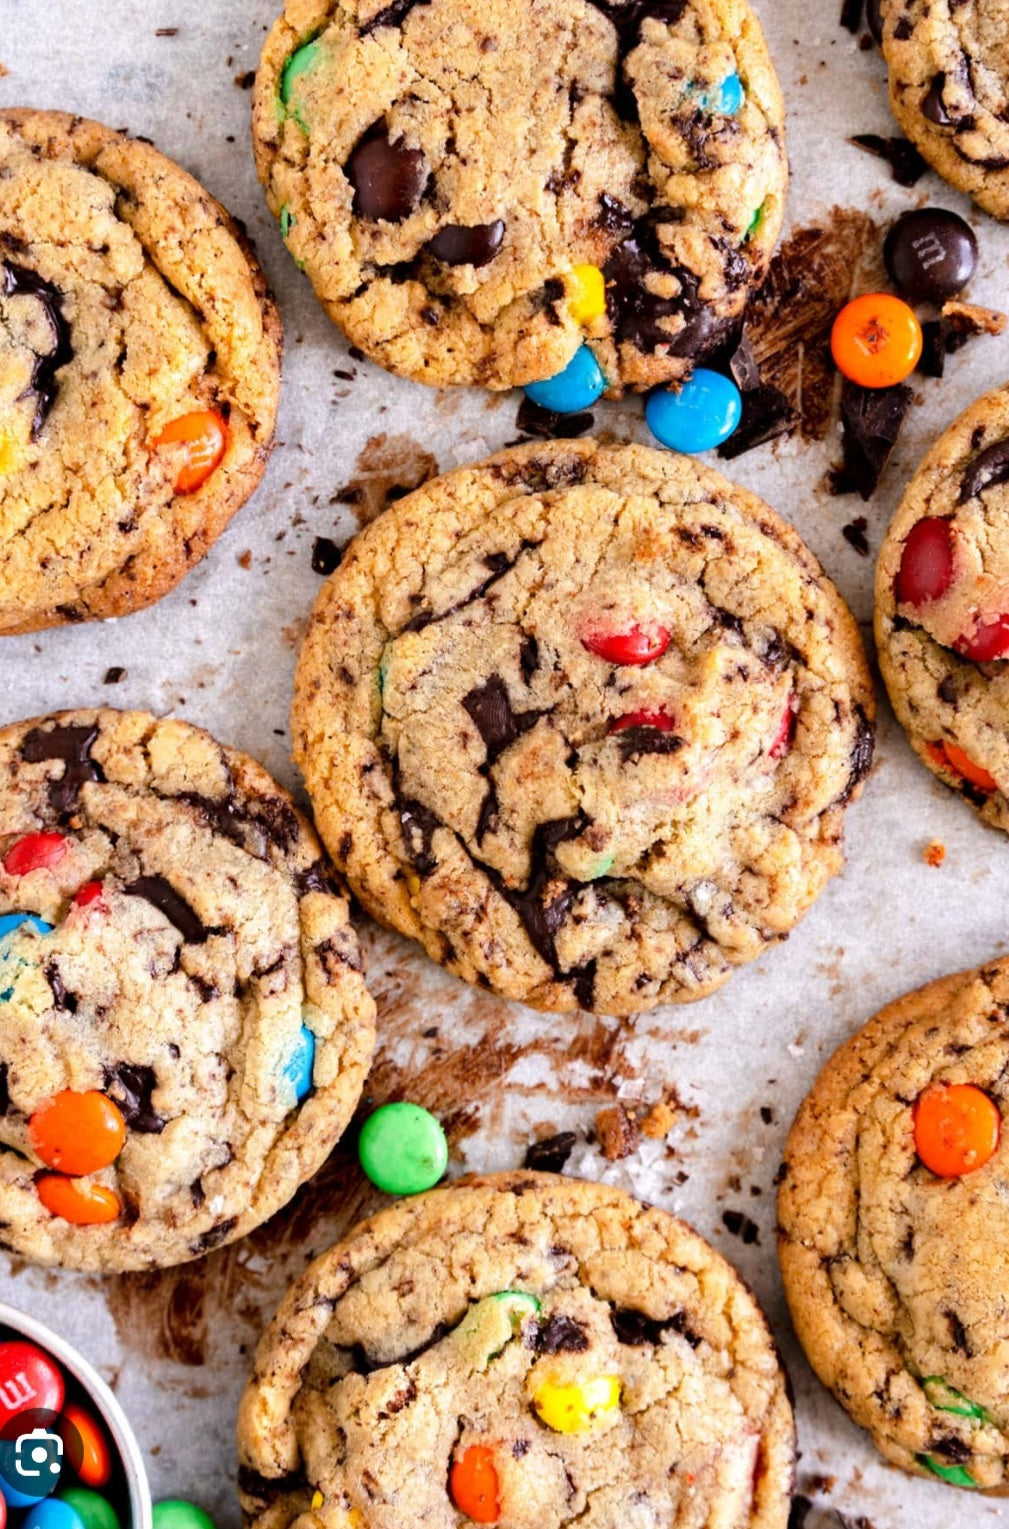 Chocolate Chip M&M Cookie Baking Class (Kids) Saturday August 17th. 2pm-4pm.